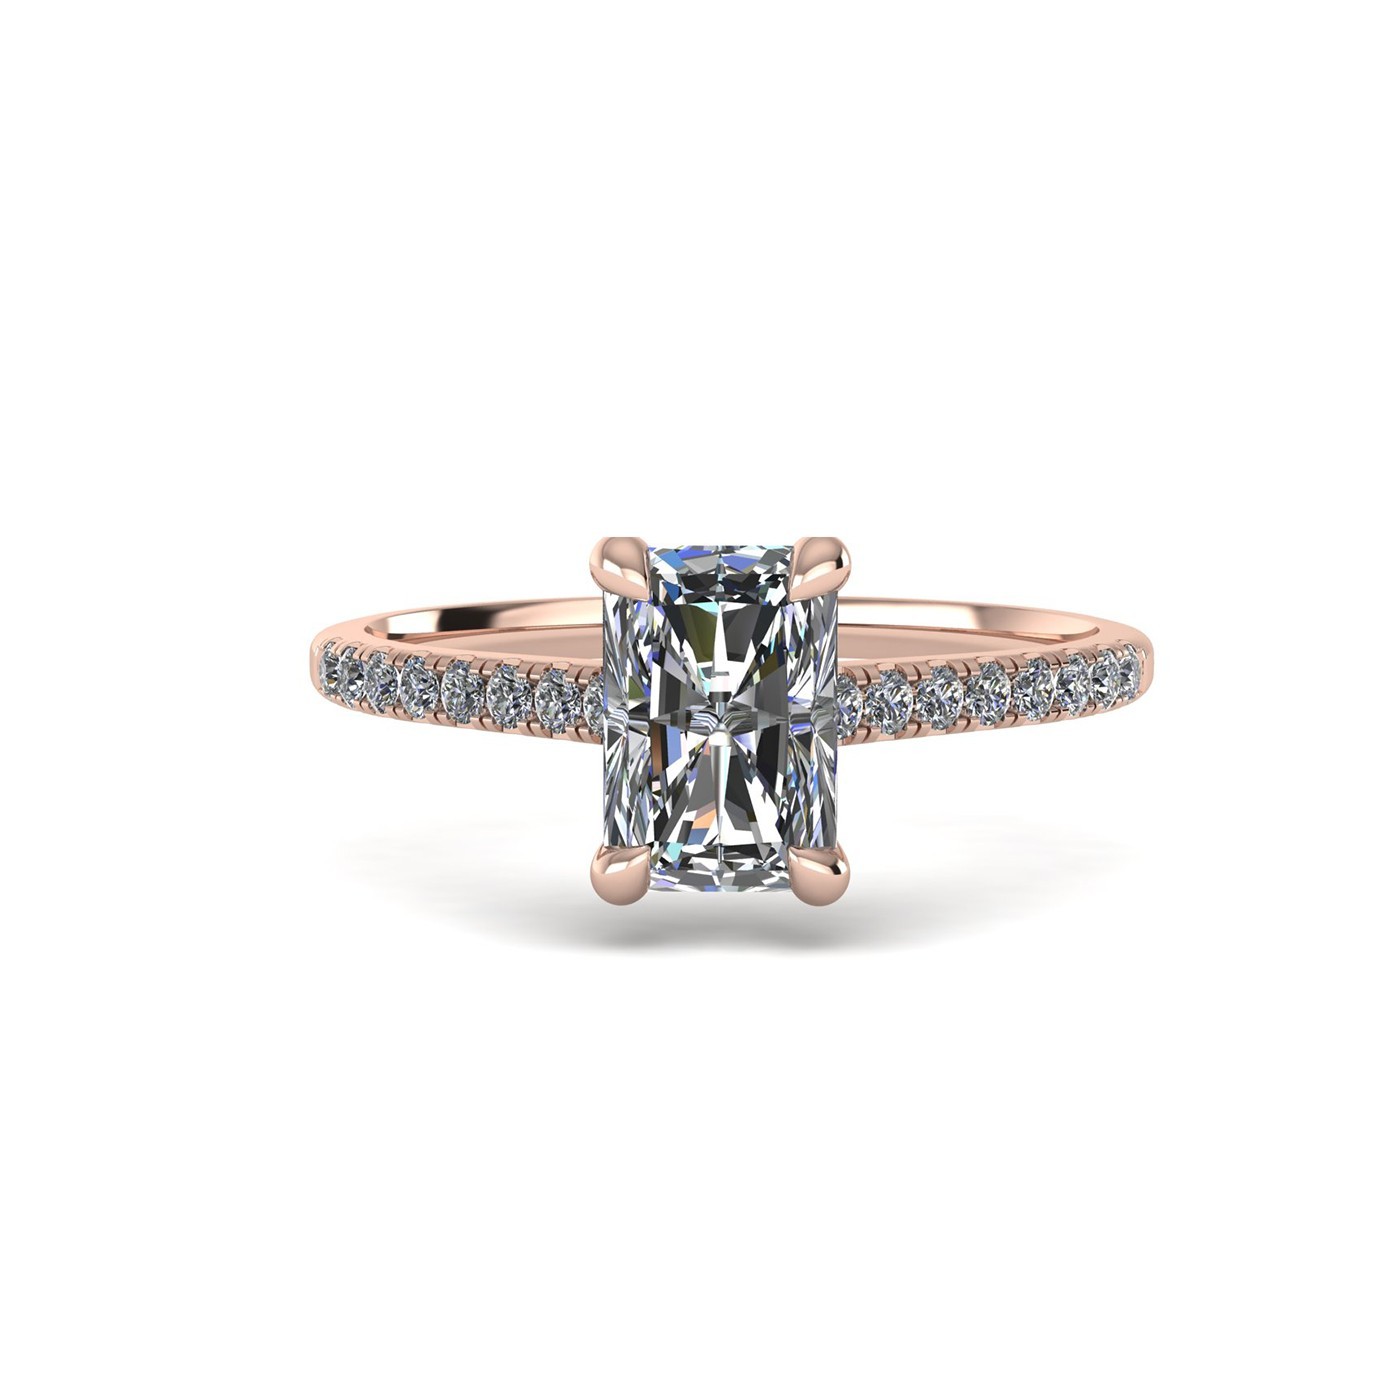 18K ROSE GOLD 4 PRONGS RADIANT CUT DIAMOND ENGAGEMENT RING WITH WHISPER THIN PAVÉ SET BAND